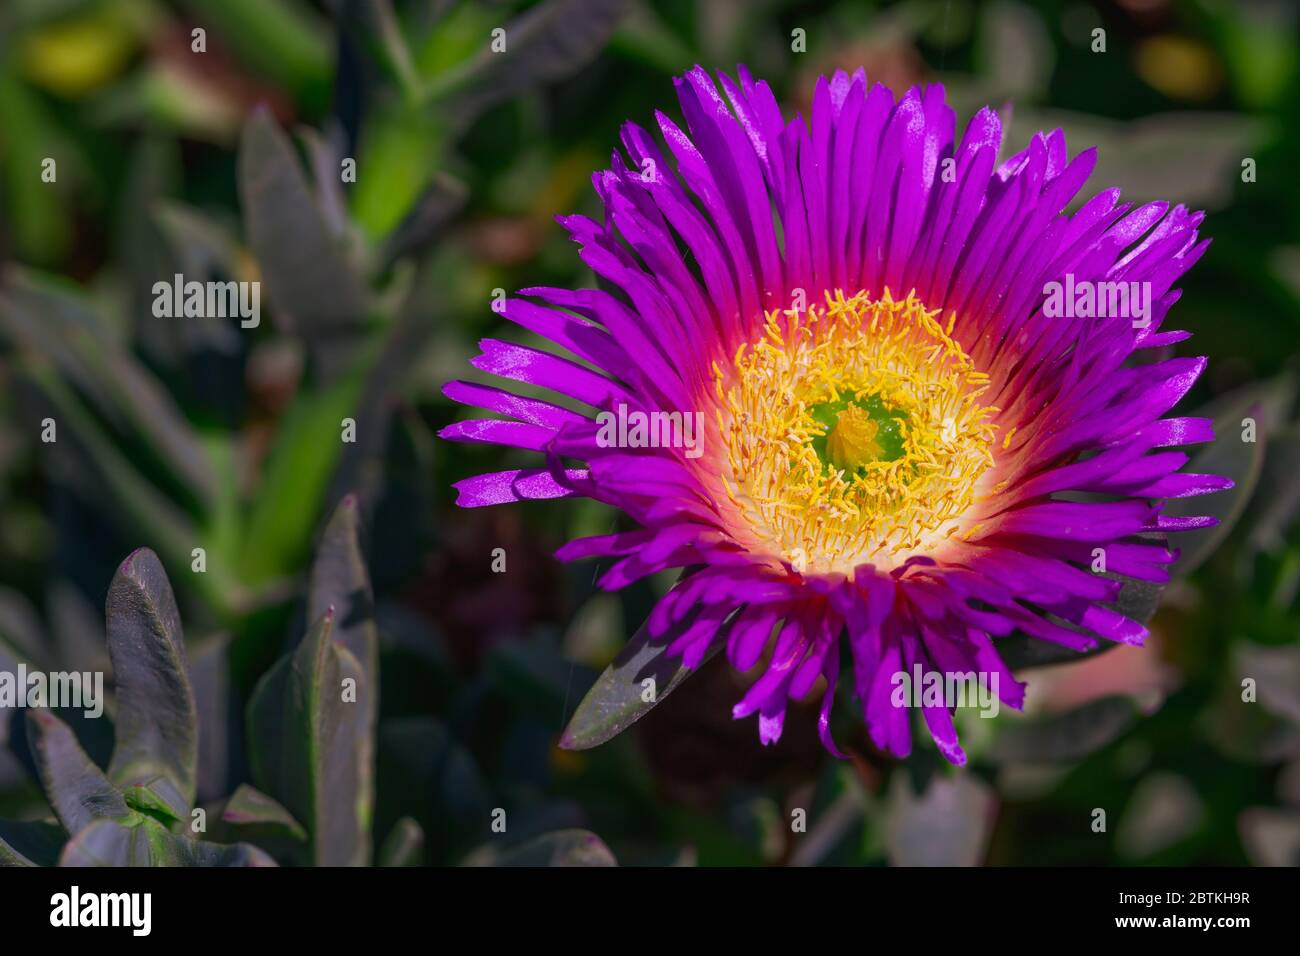 Purple flosers close up. Blossom desert.  Lampranthus spectabilis (Trailing Ice Plant) in bloom Stock Photo